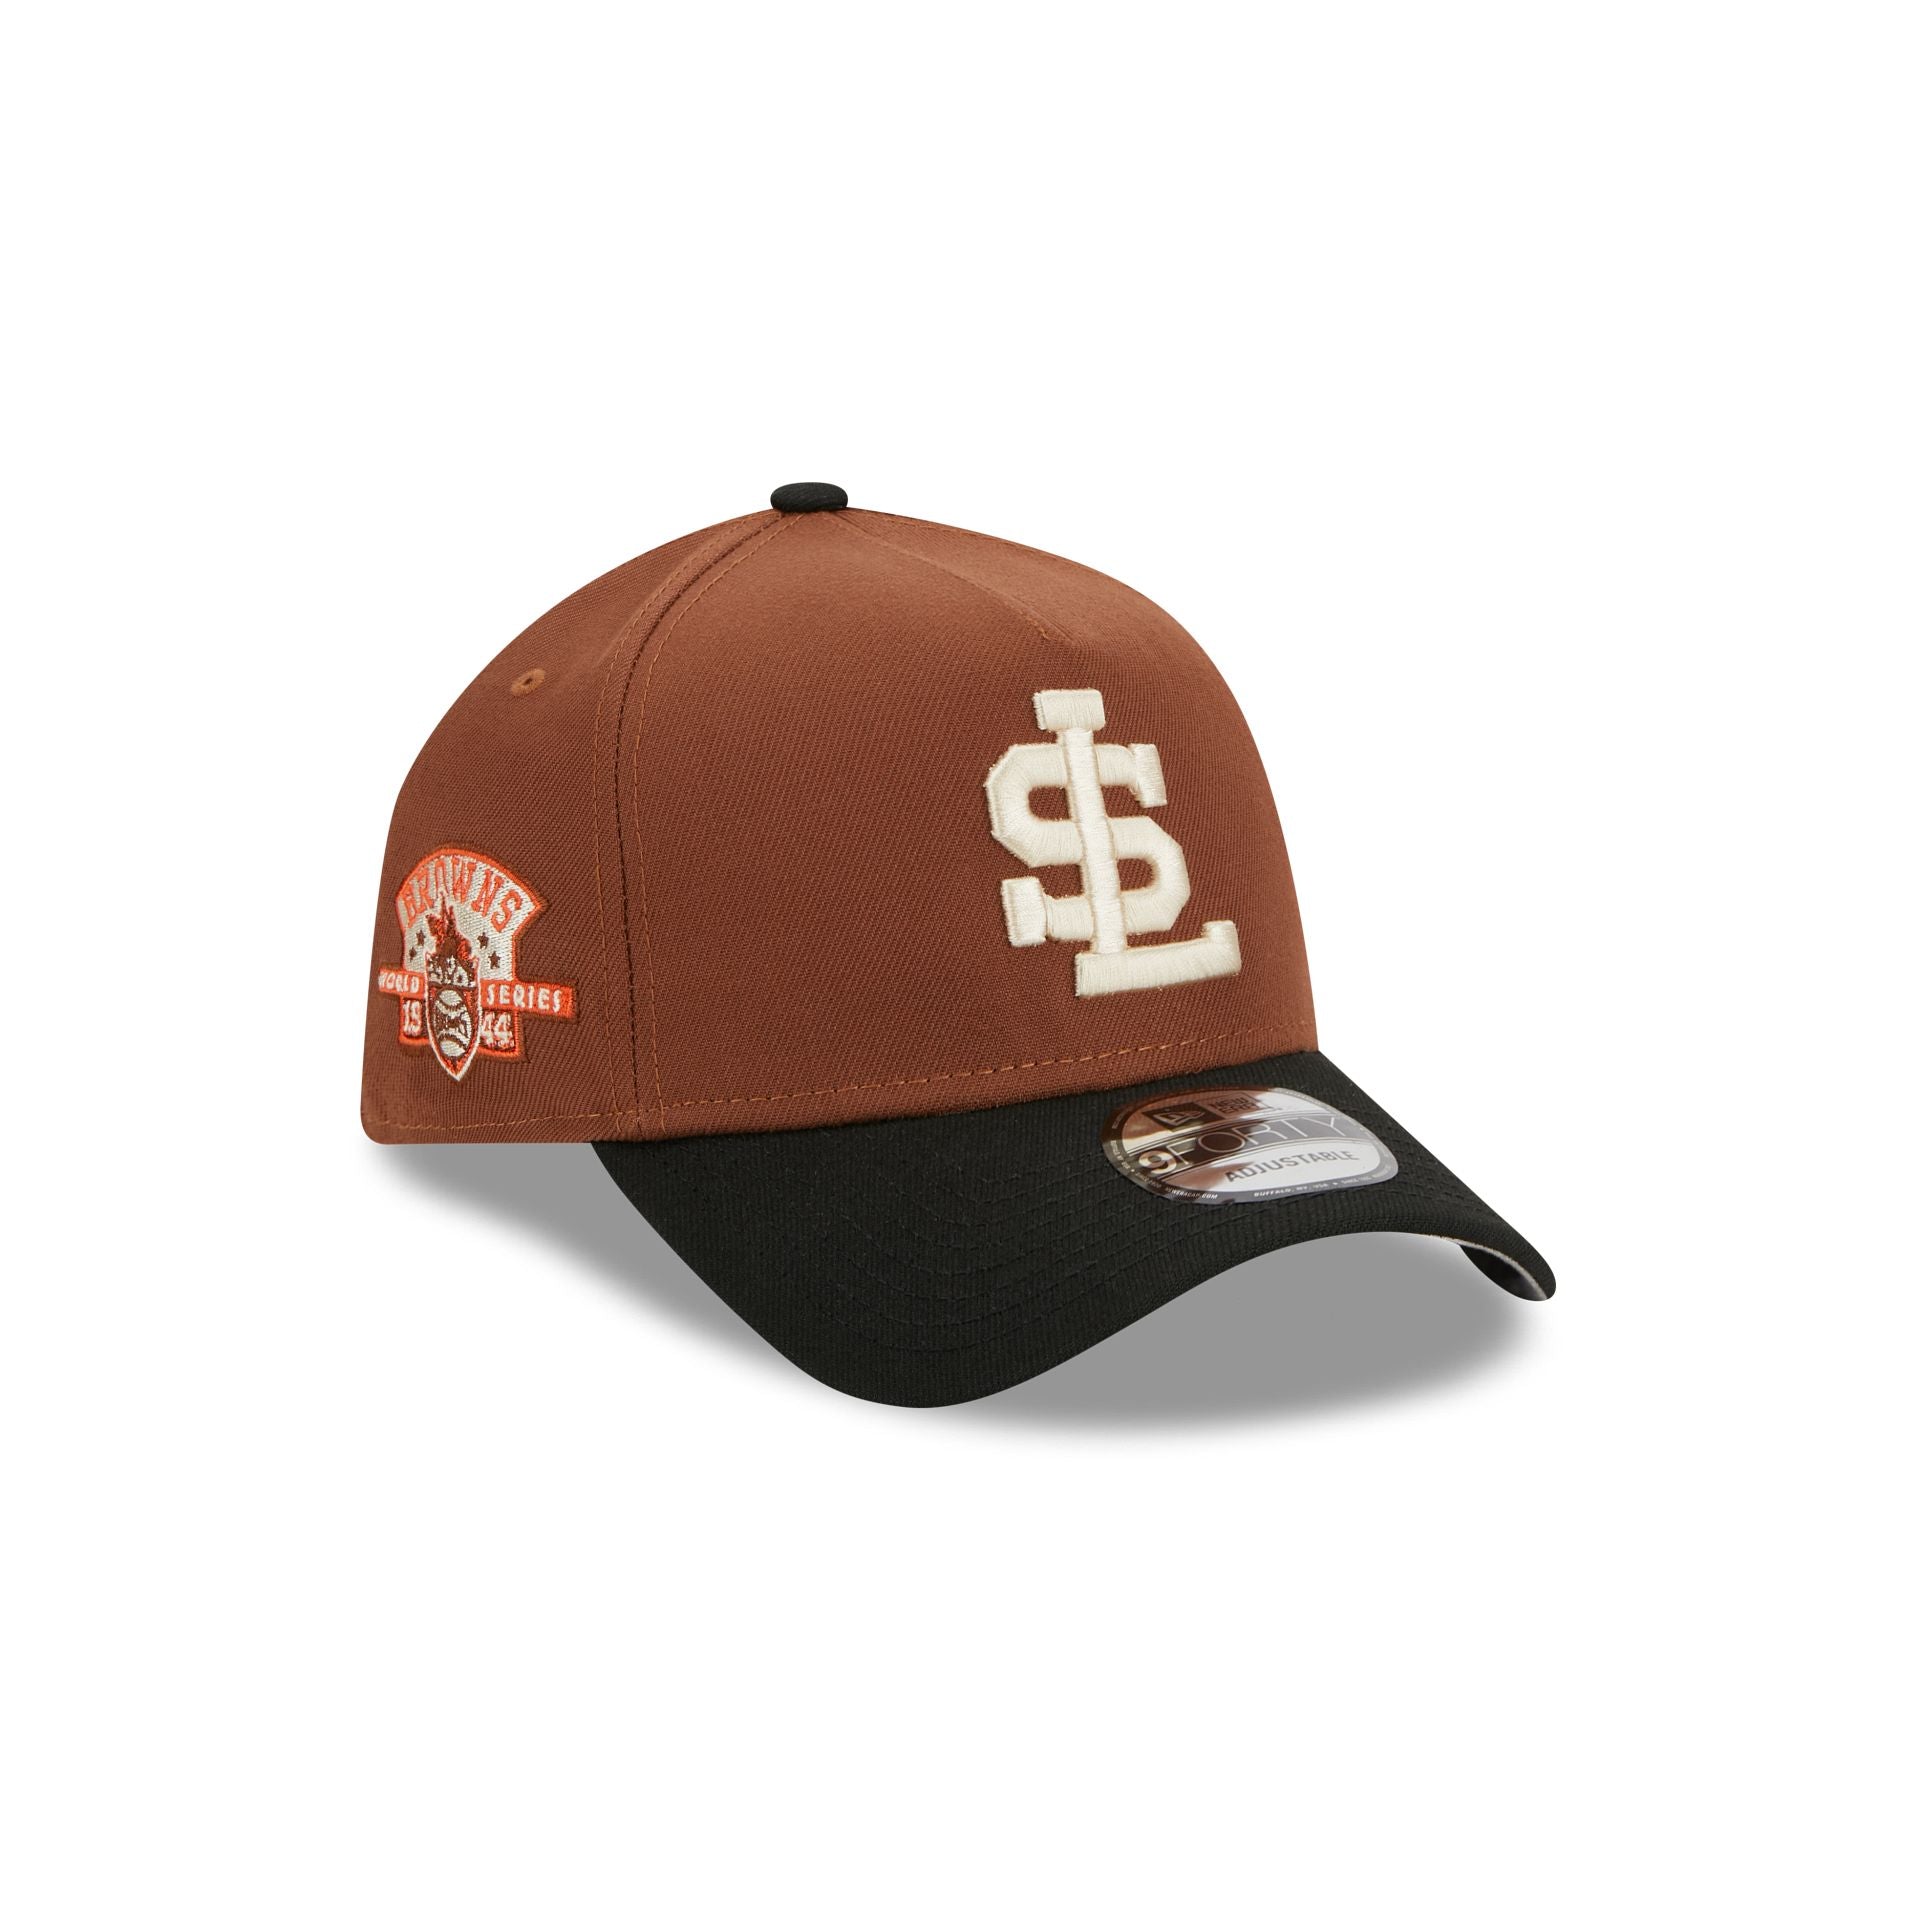 St. Louis Browns Harvest 9FORTY A-Frame Snapback Hat, MLB by New Era